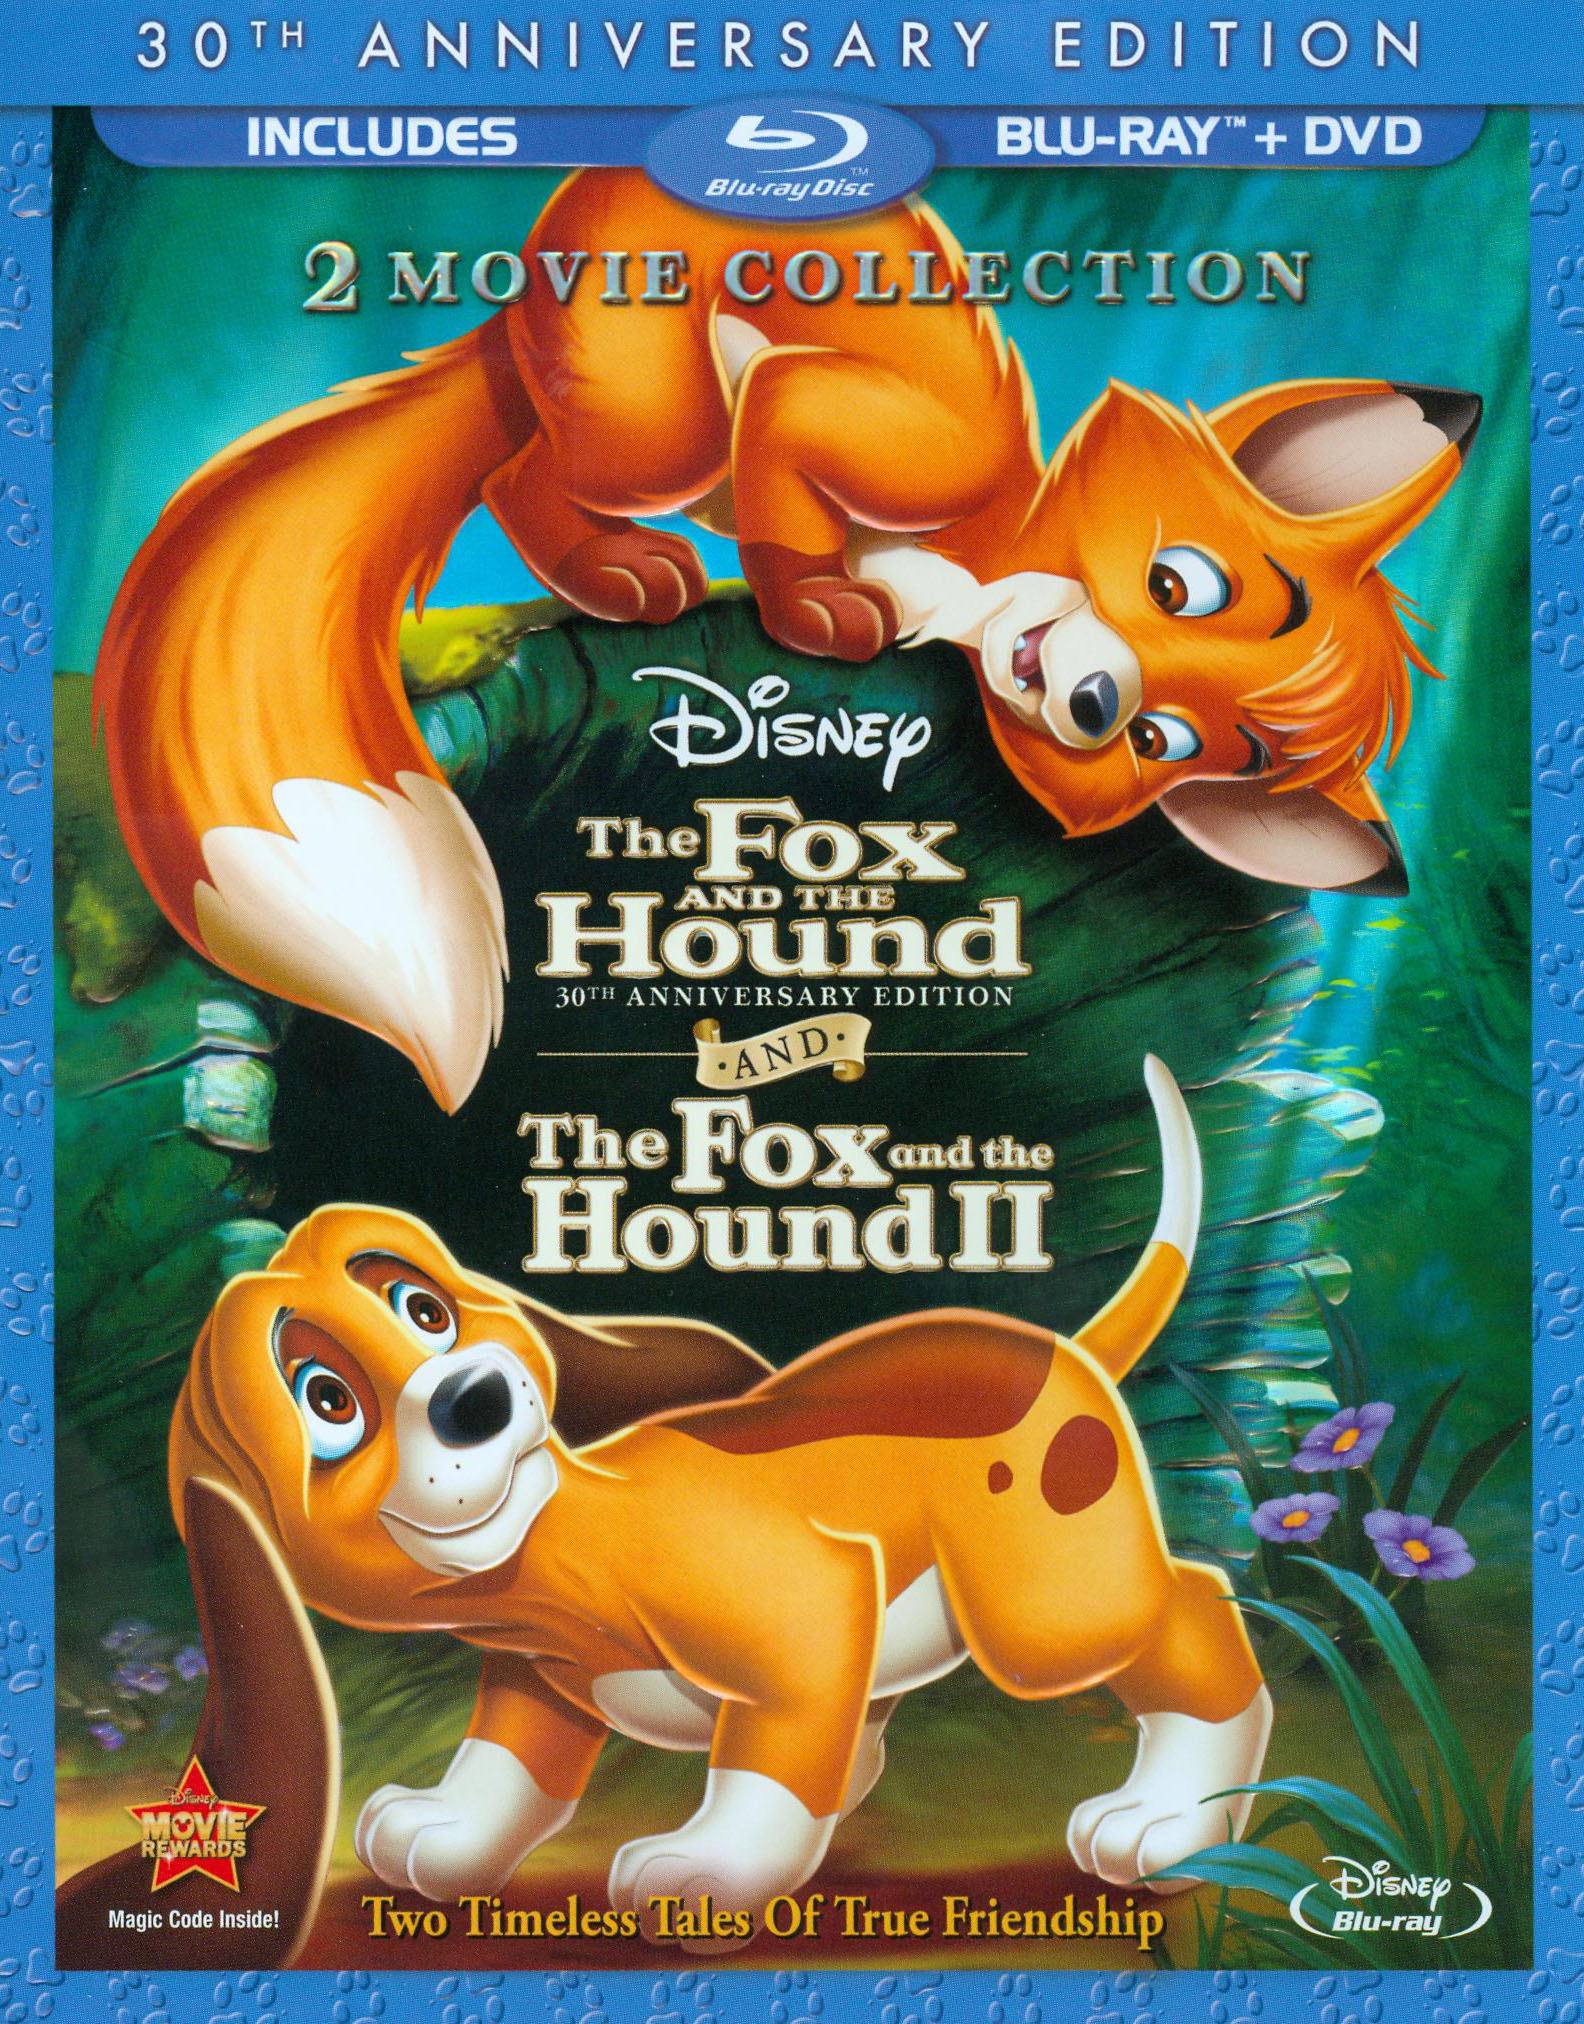 Best Buy The Fox And The Hound The Fox And The Hound Ii [30th Anniversary Edition] [3 Discs